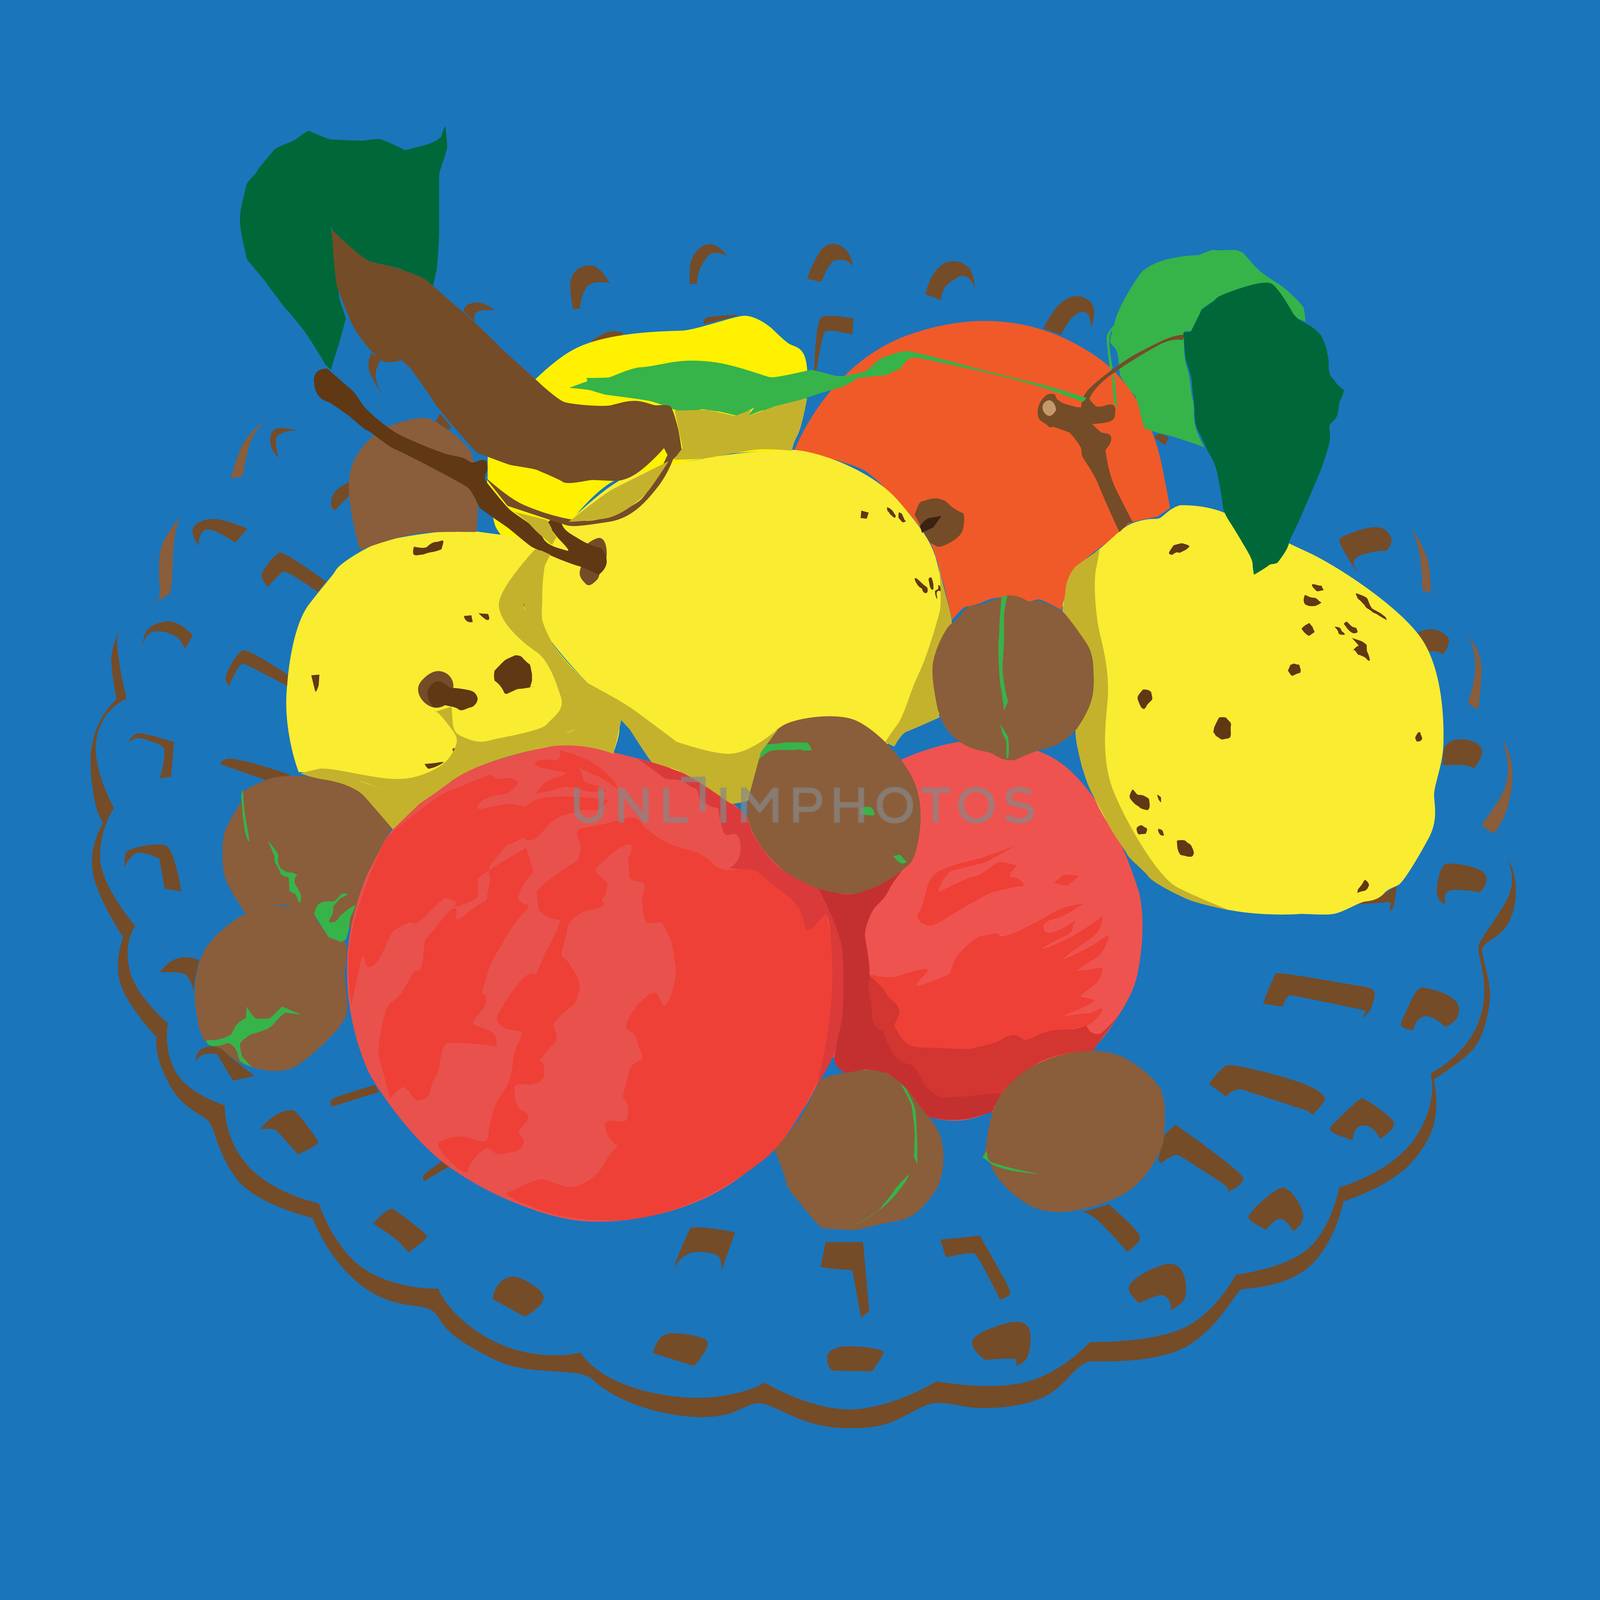 Autumn composition, hand drawn illustration of a plate with fruits over a blue background